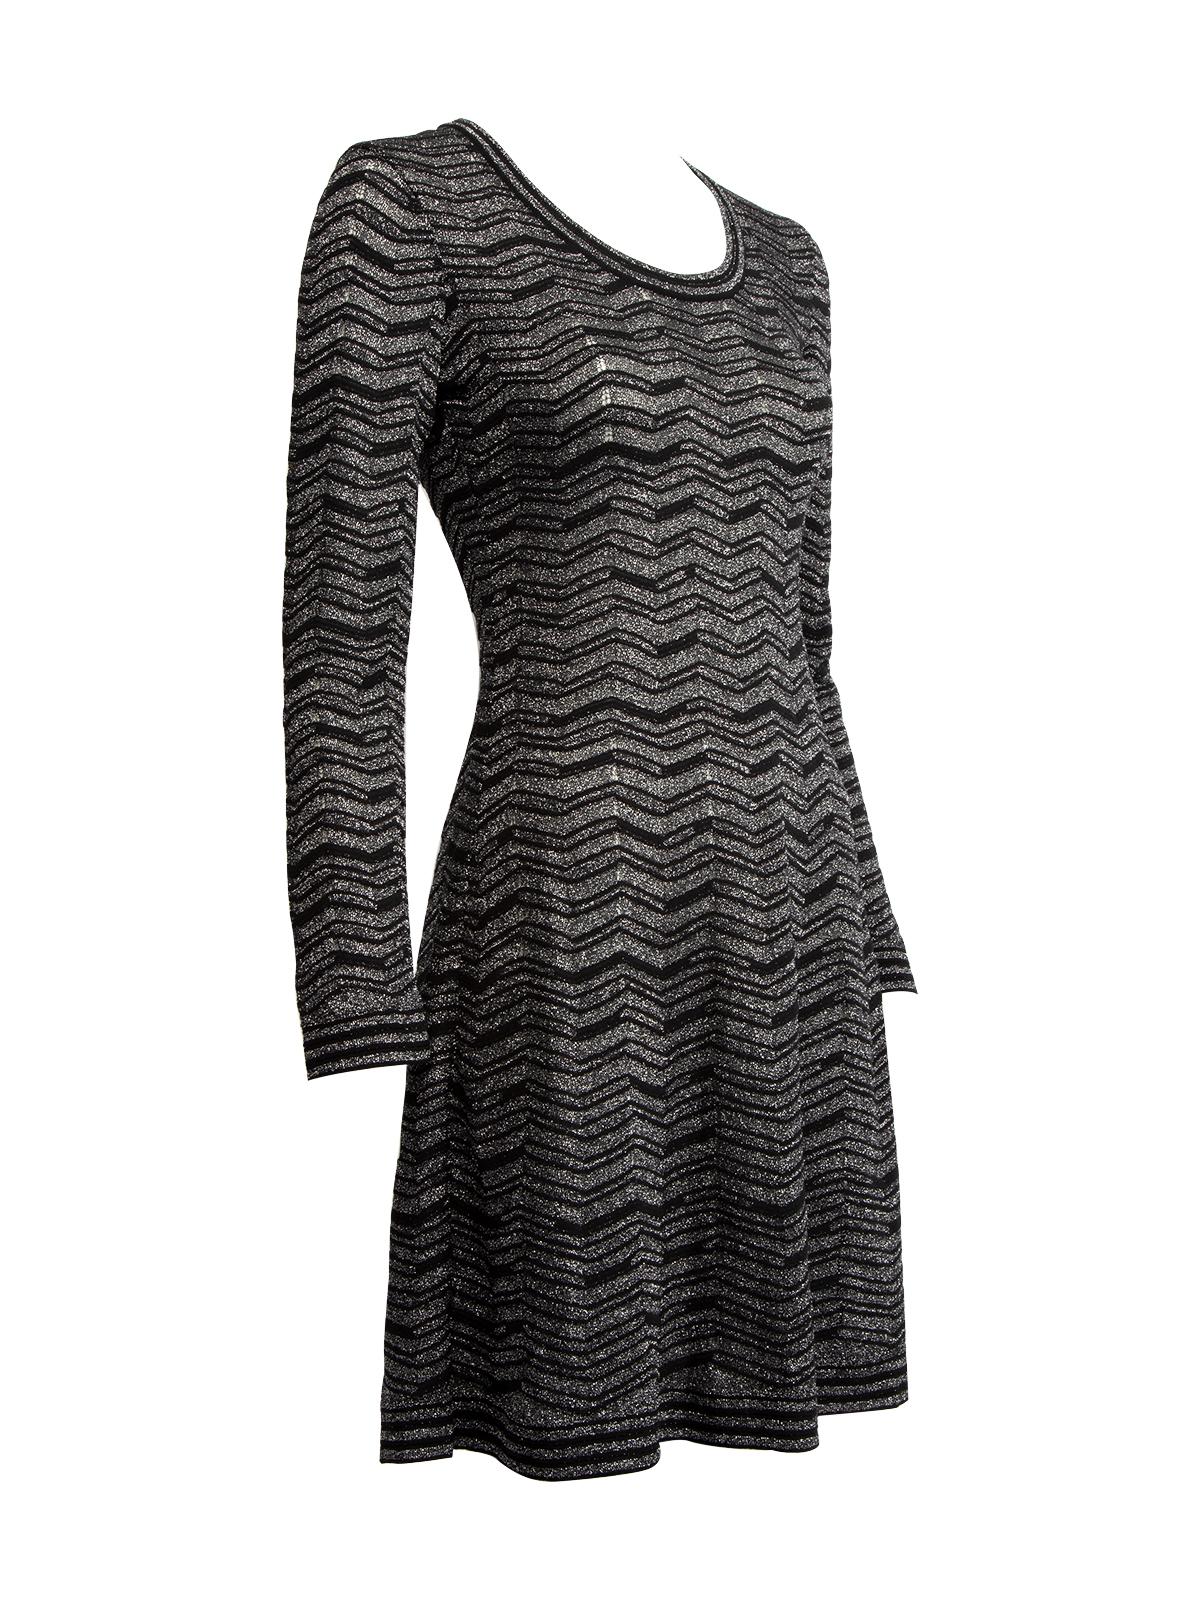 CONDITION is Never worn, with tags. No visible wear to dress is evident on this new M Missoni designer resale item. Details Black and silver Silver thread Zig zag pattern Long sleeve Round neck Knee length Made in Tunisia Composition 47%